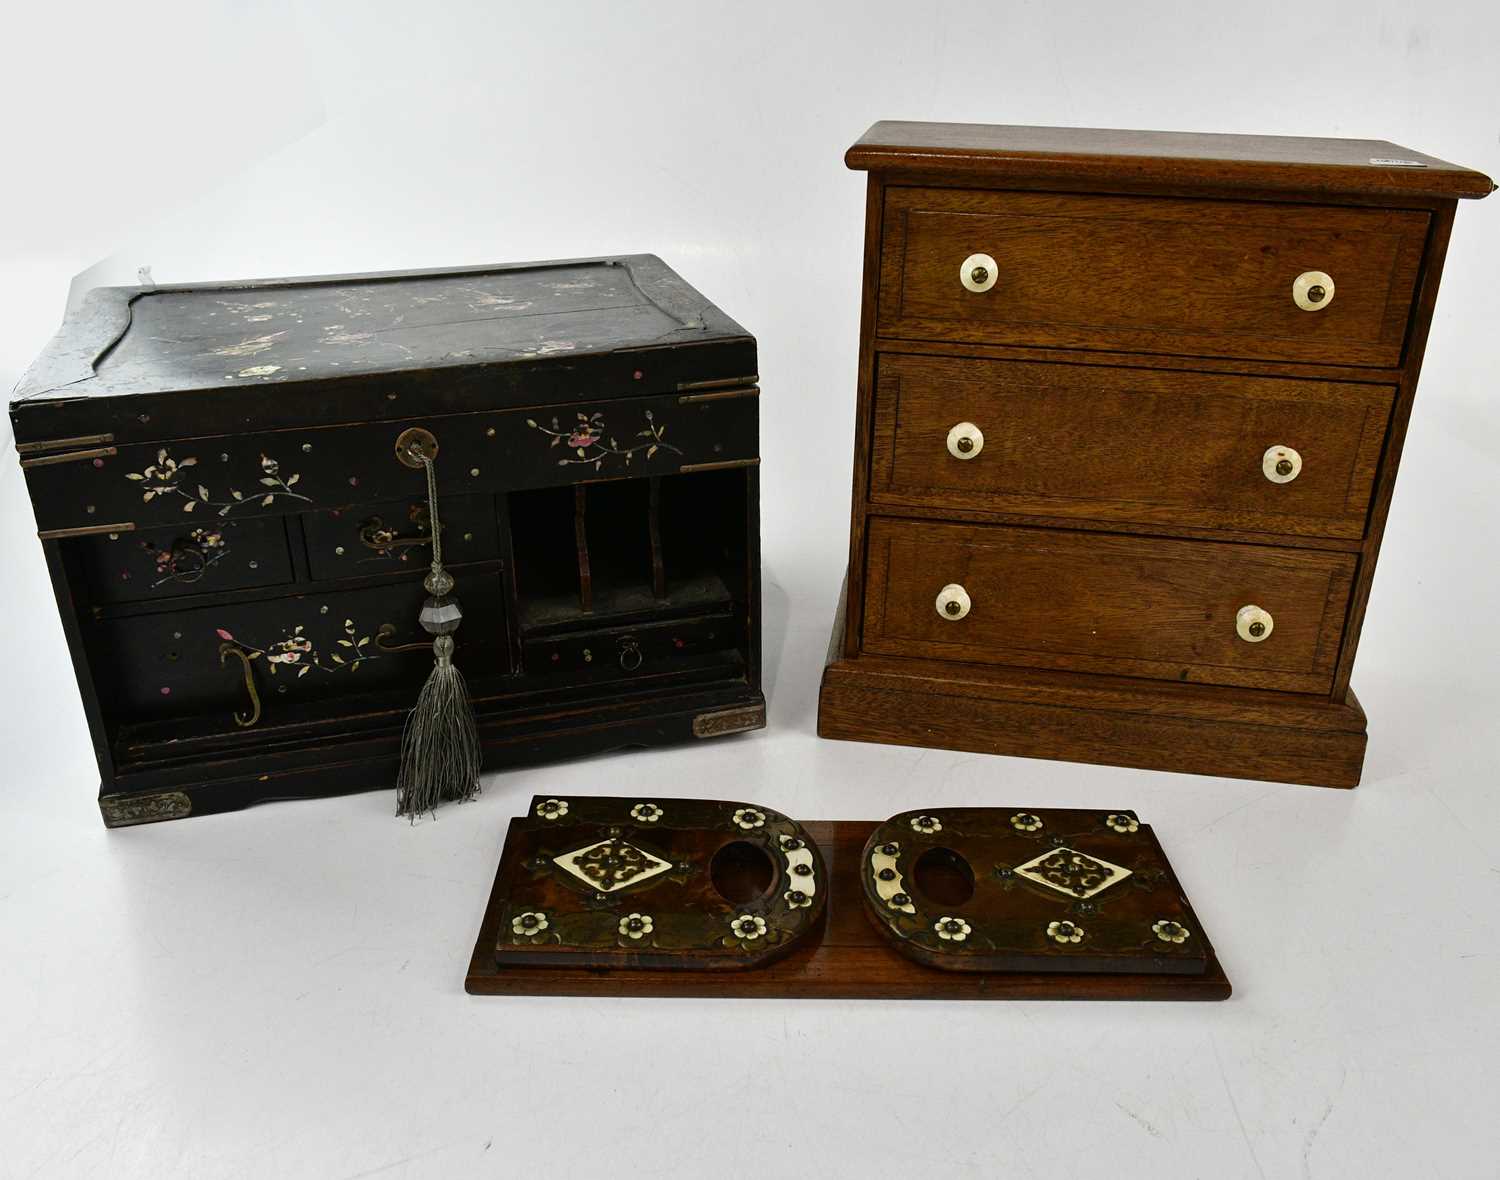 An early 20th century Japanese lacquered jewellery cabinet with mother of pearl inlaid decoration